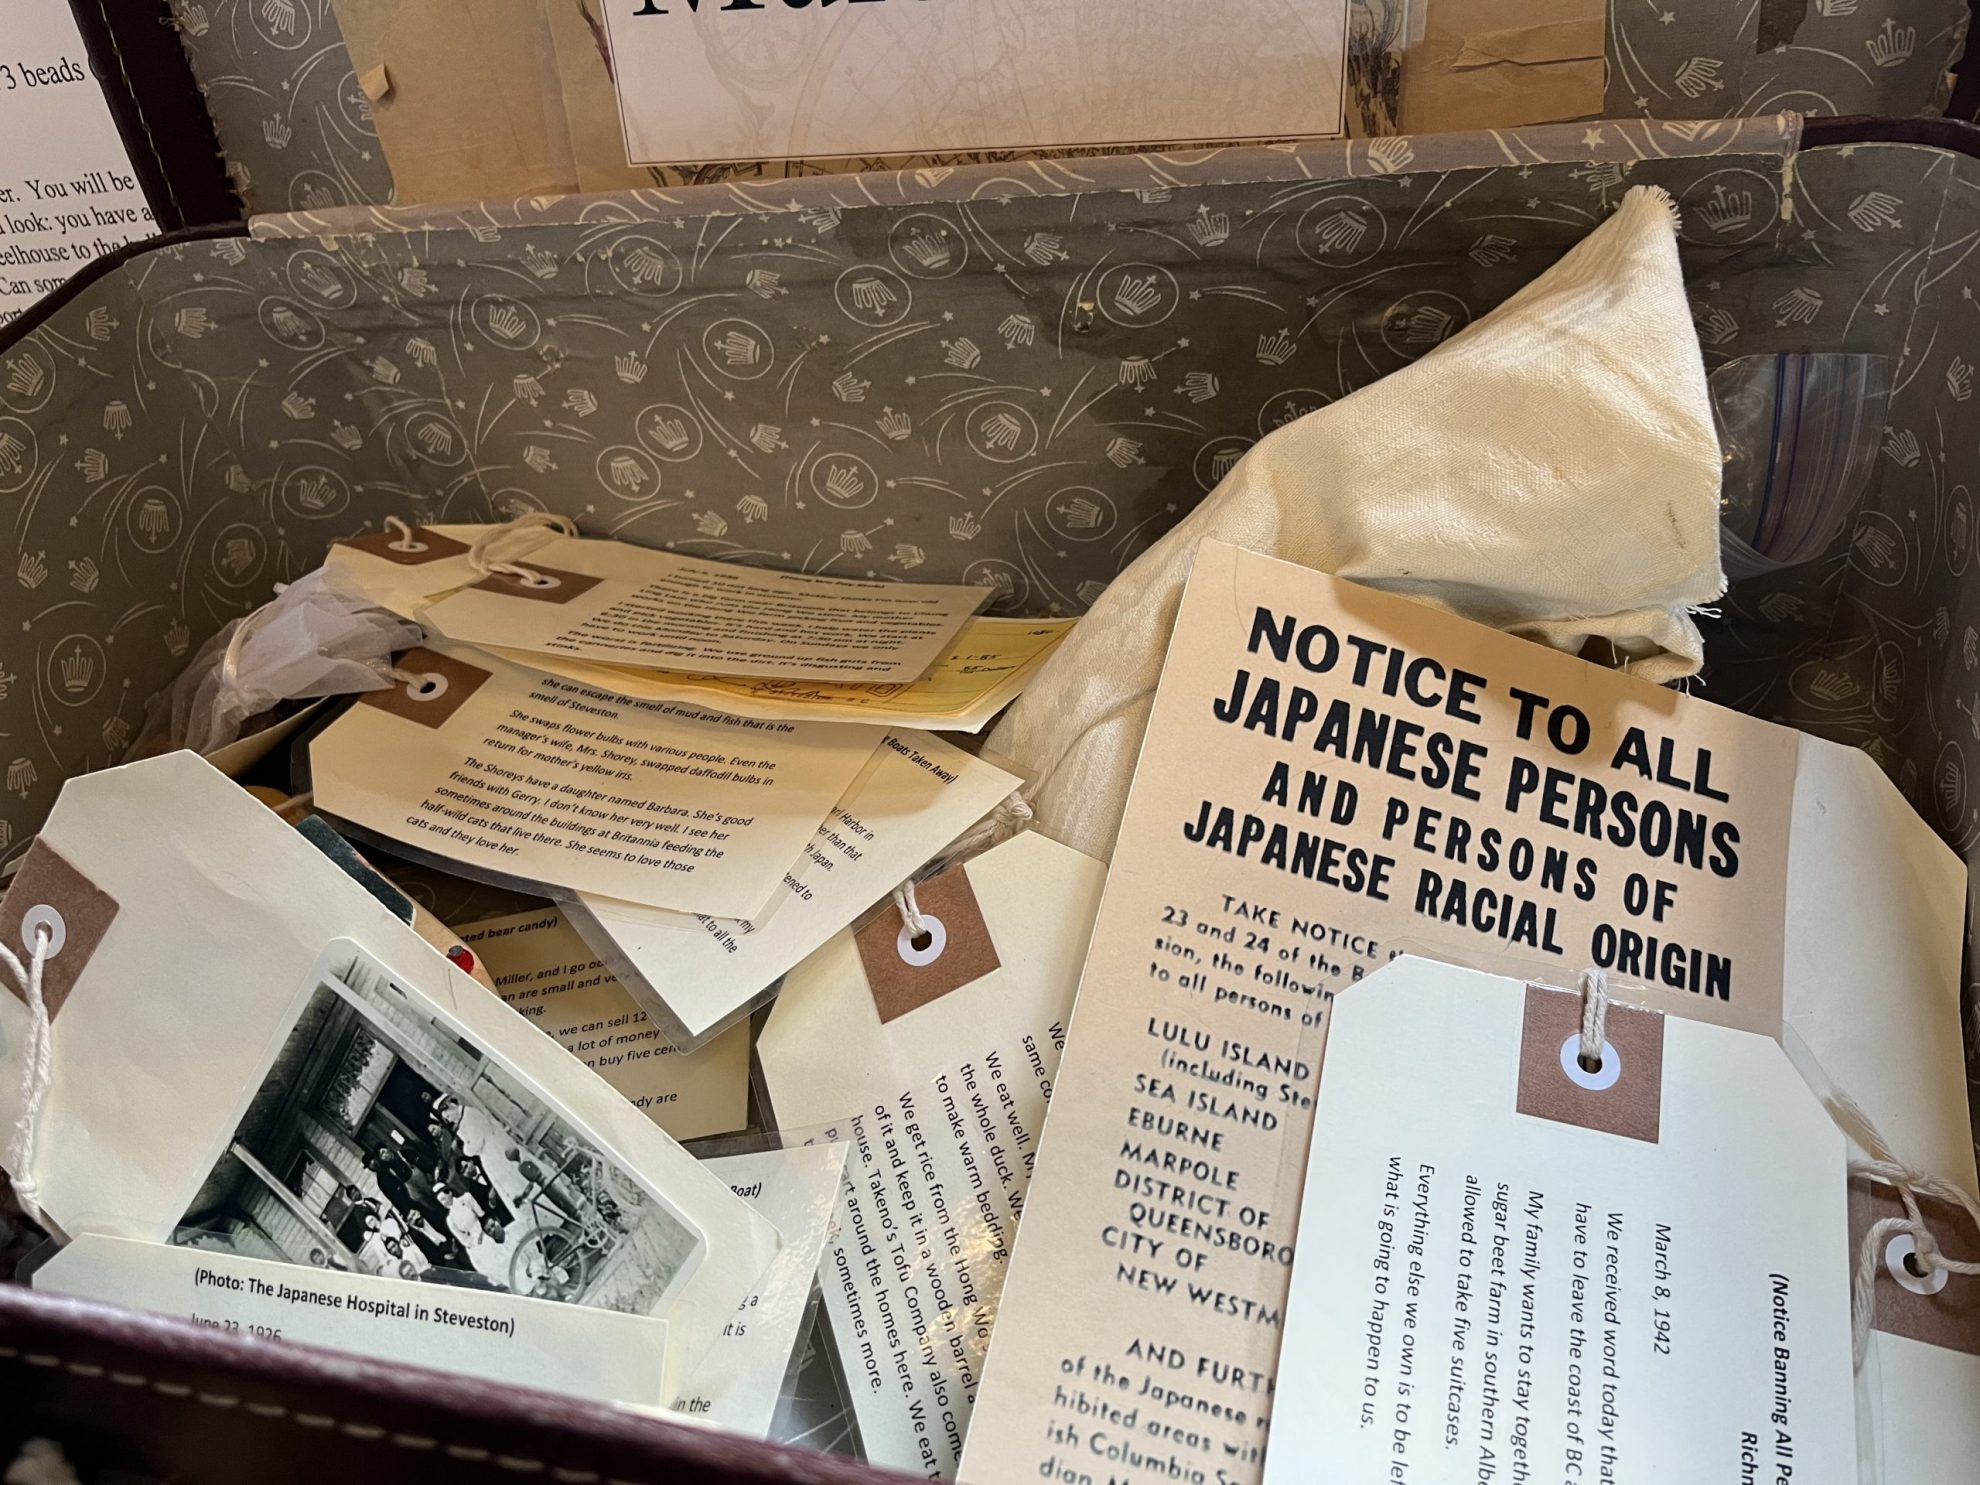 Box made of brown fabric with imperial crown pattern, filled with canvas bas and paper tags, along with a paper with the headline: Notice to all Japanese Persons and Persons of Japanese Racial Origin.